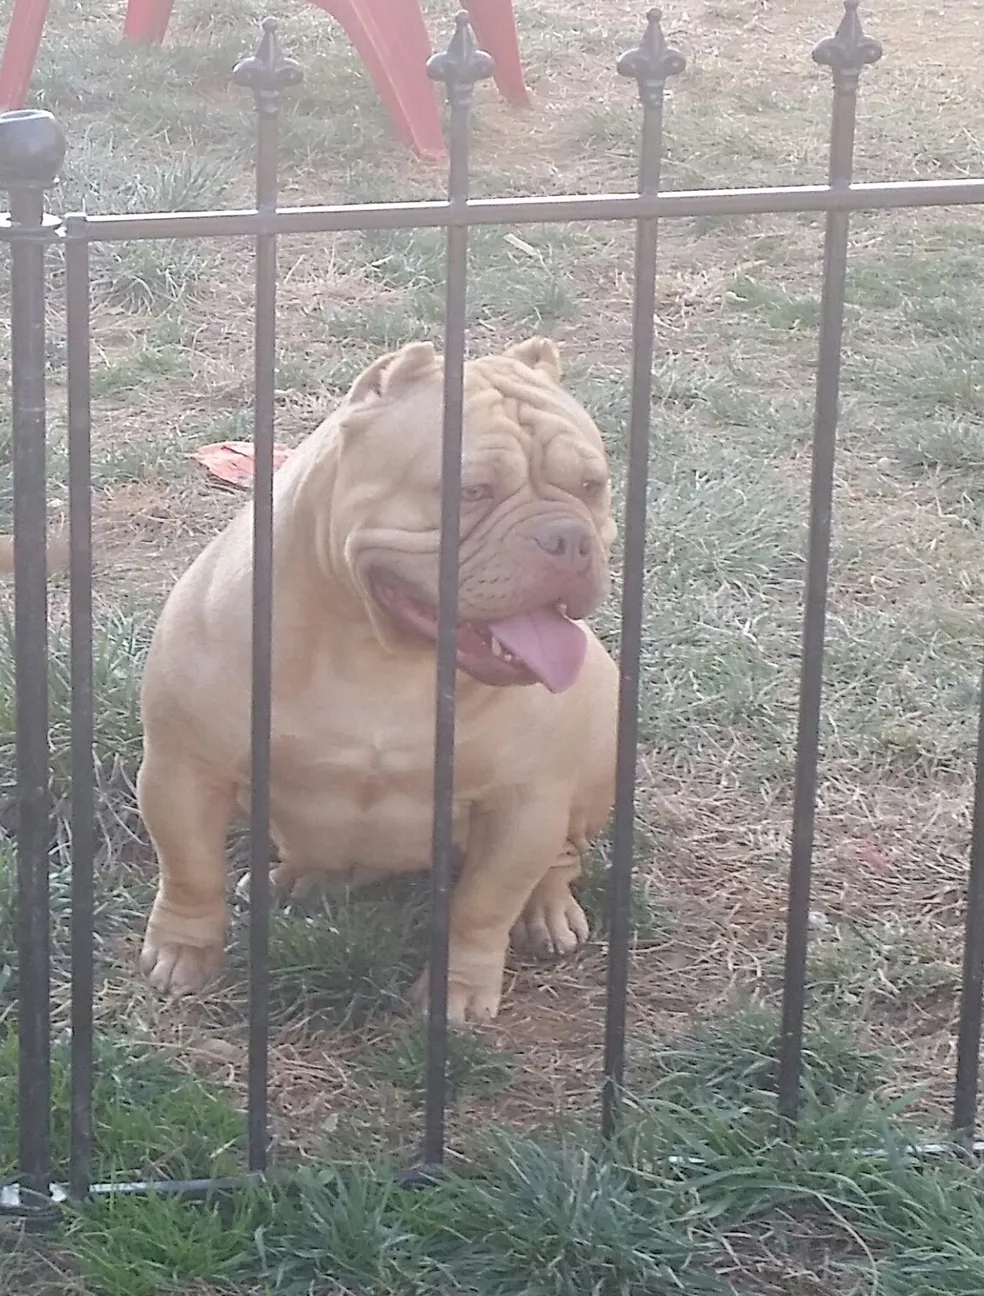 A dog is sitting in the grass behind bars.